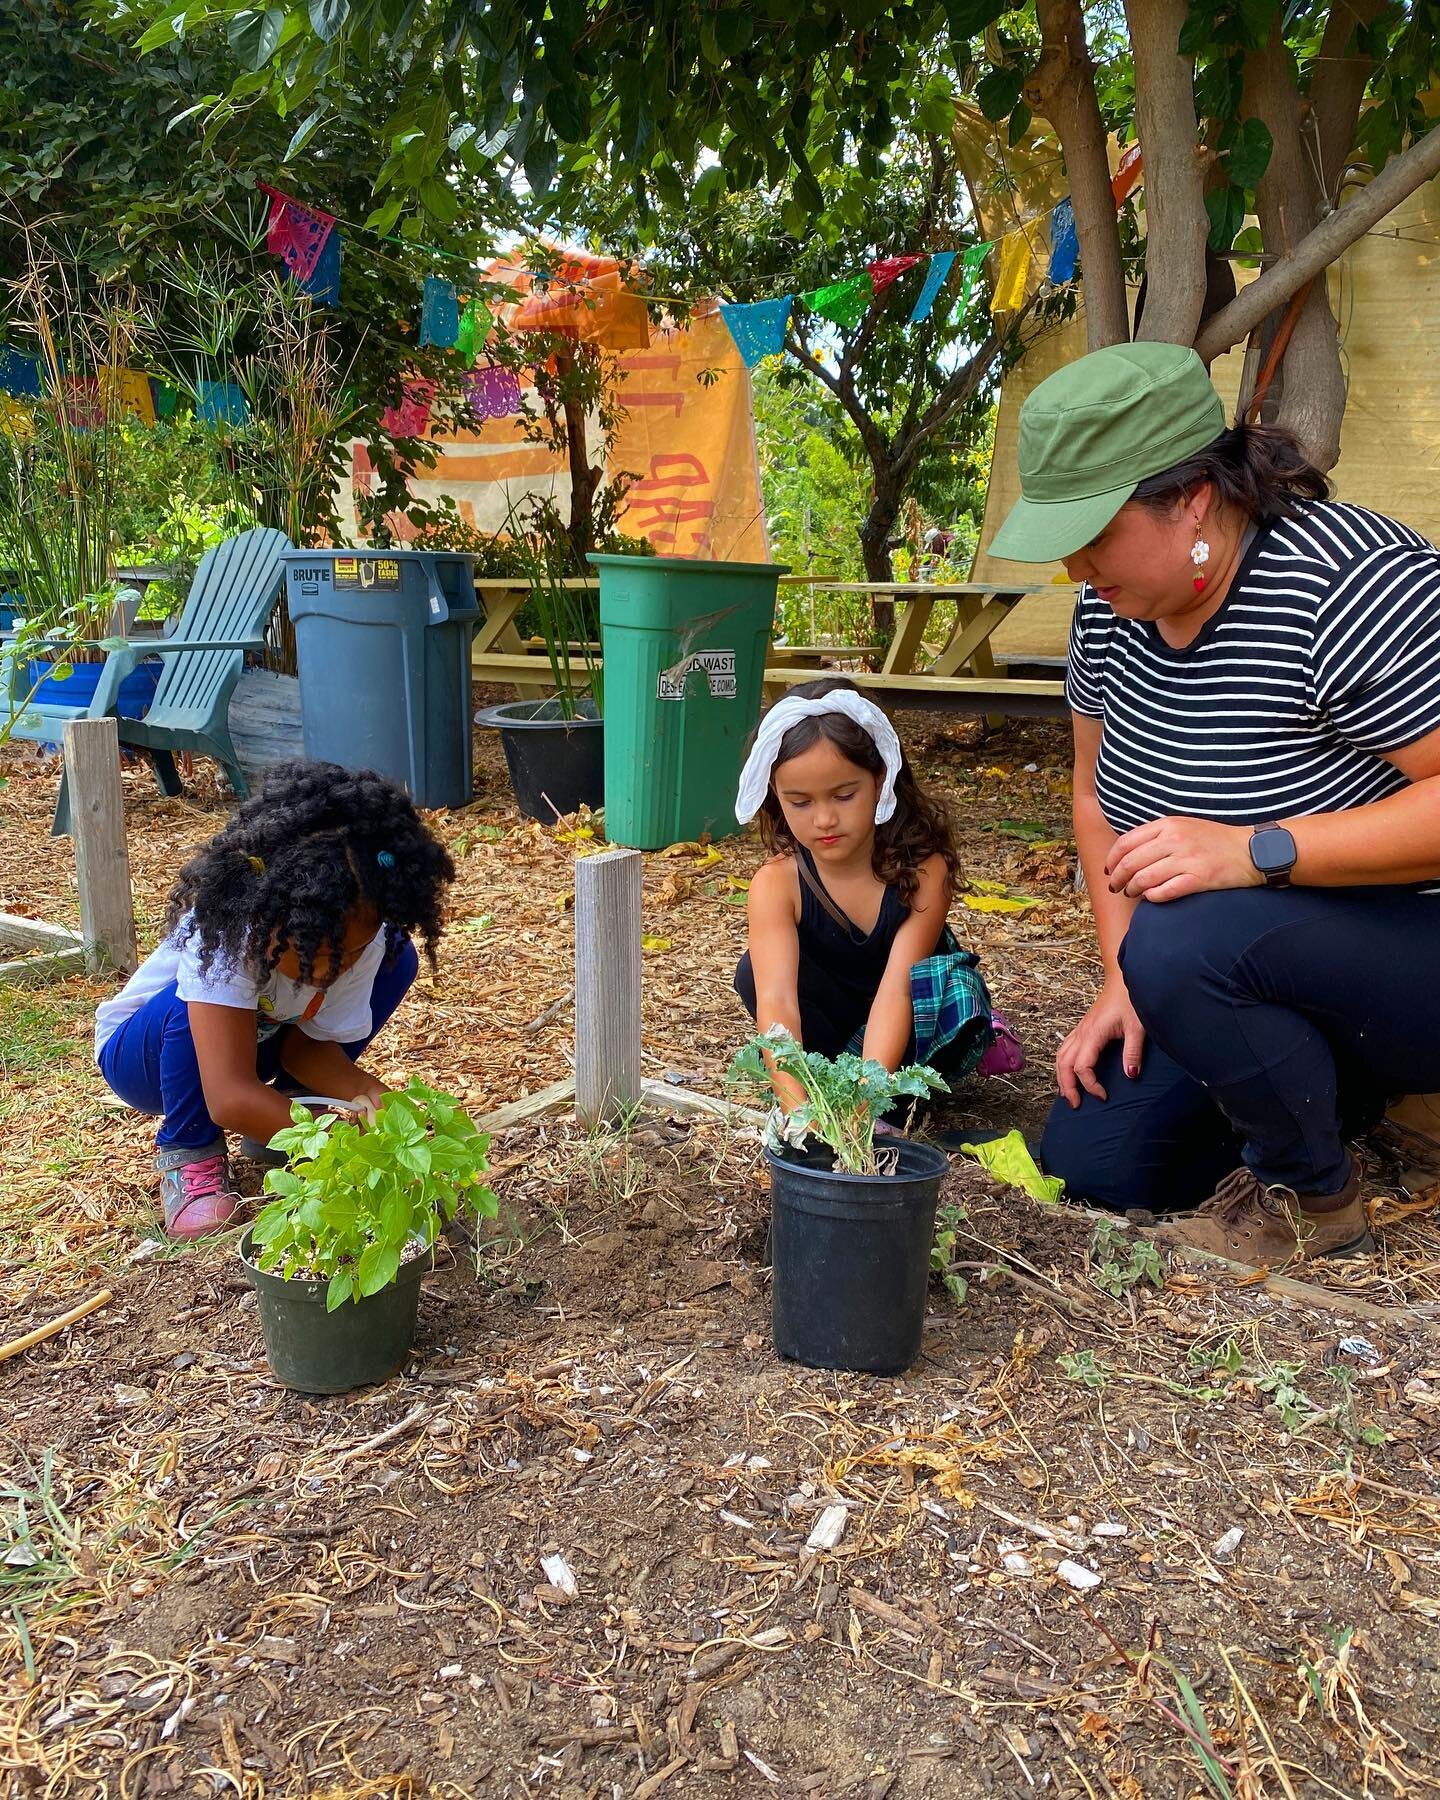 Our Abejas kids program is back! 🐝 Sign your children up for this Summer Gardening program where they can learn about gardening, social justice, food preparation, and more! 🌱 Children ages K-6 are eligible to join, every Saturday 10am-12pm until Se